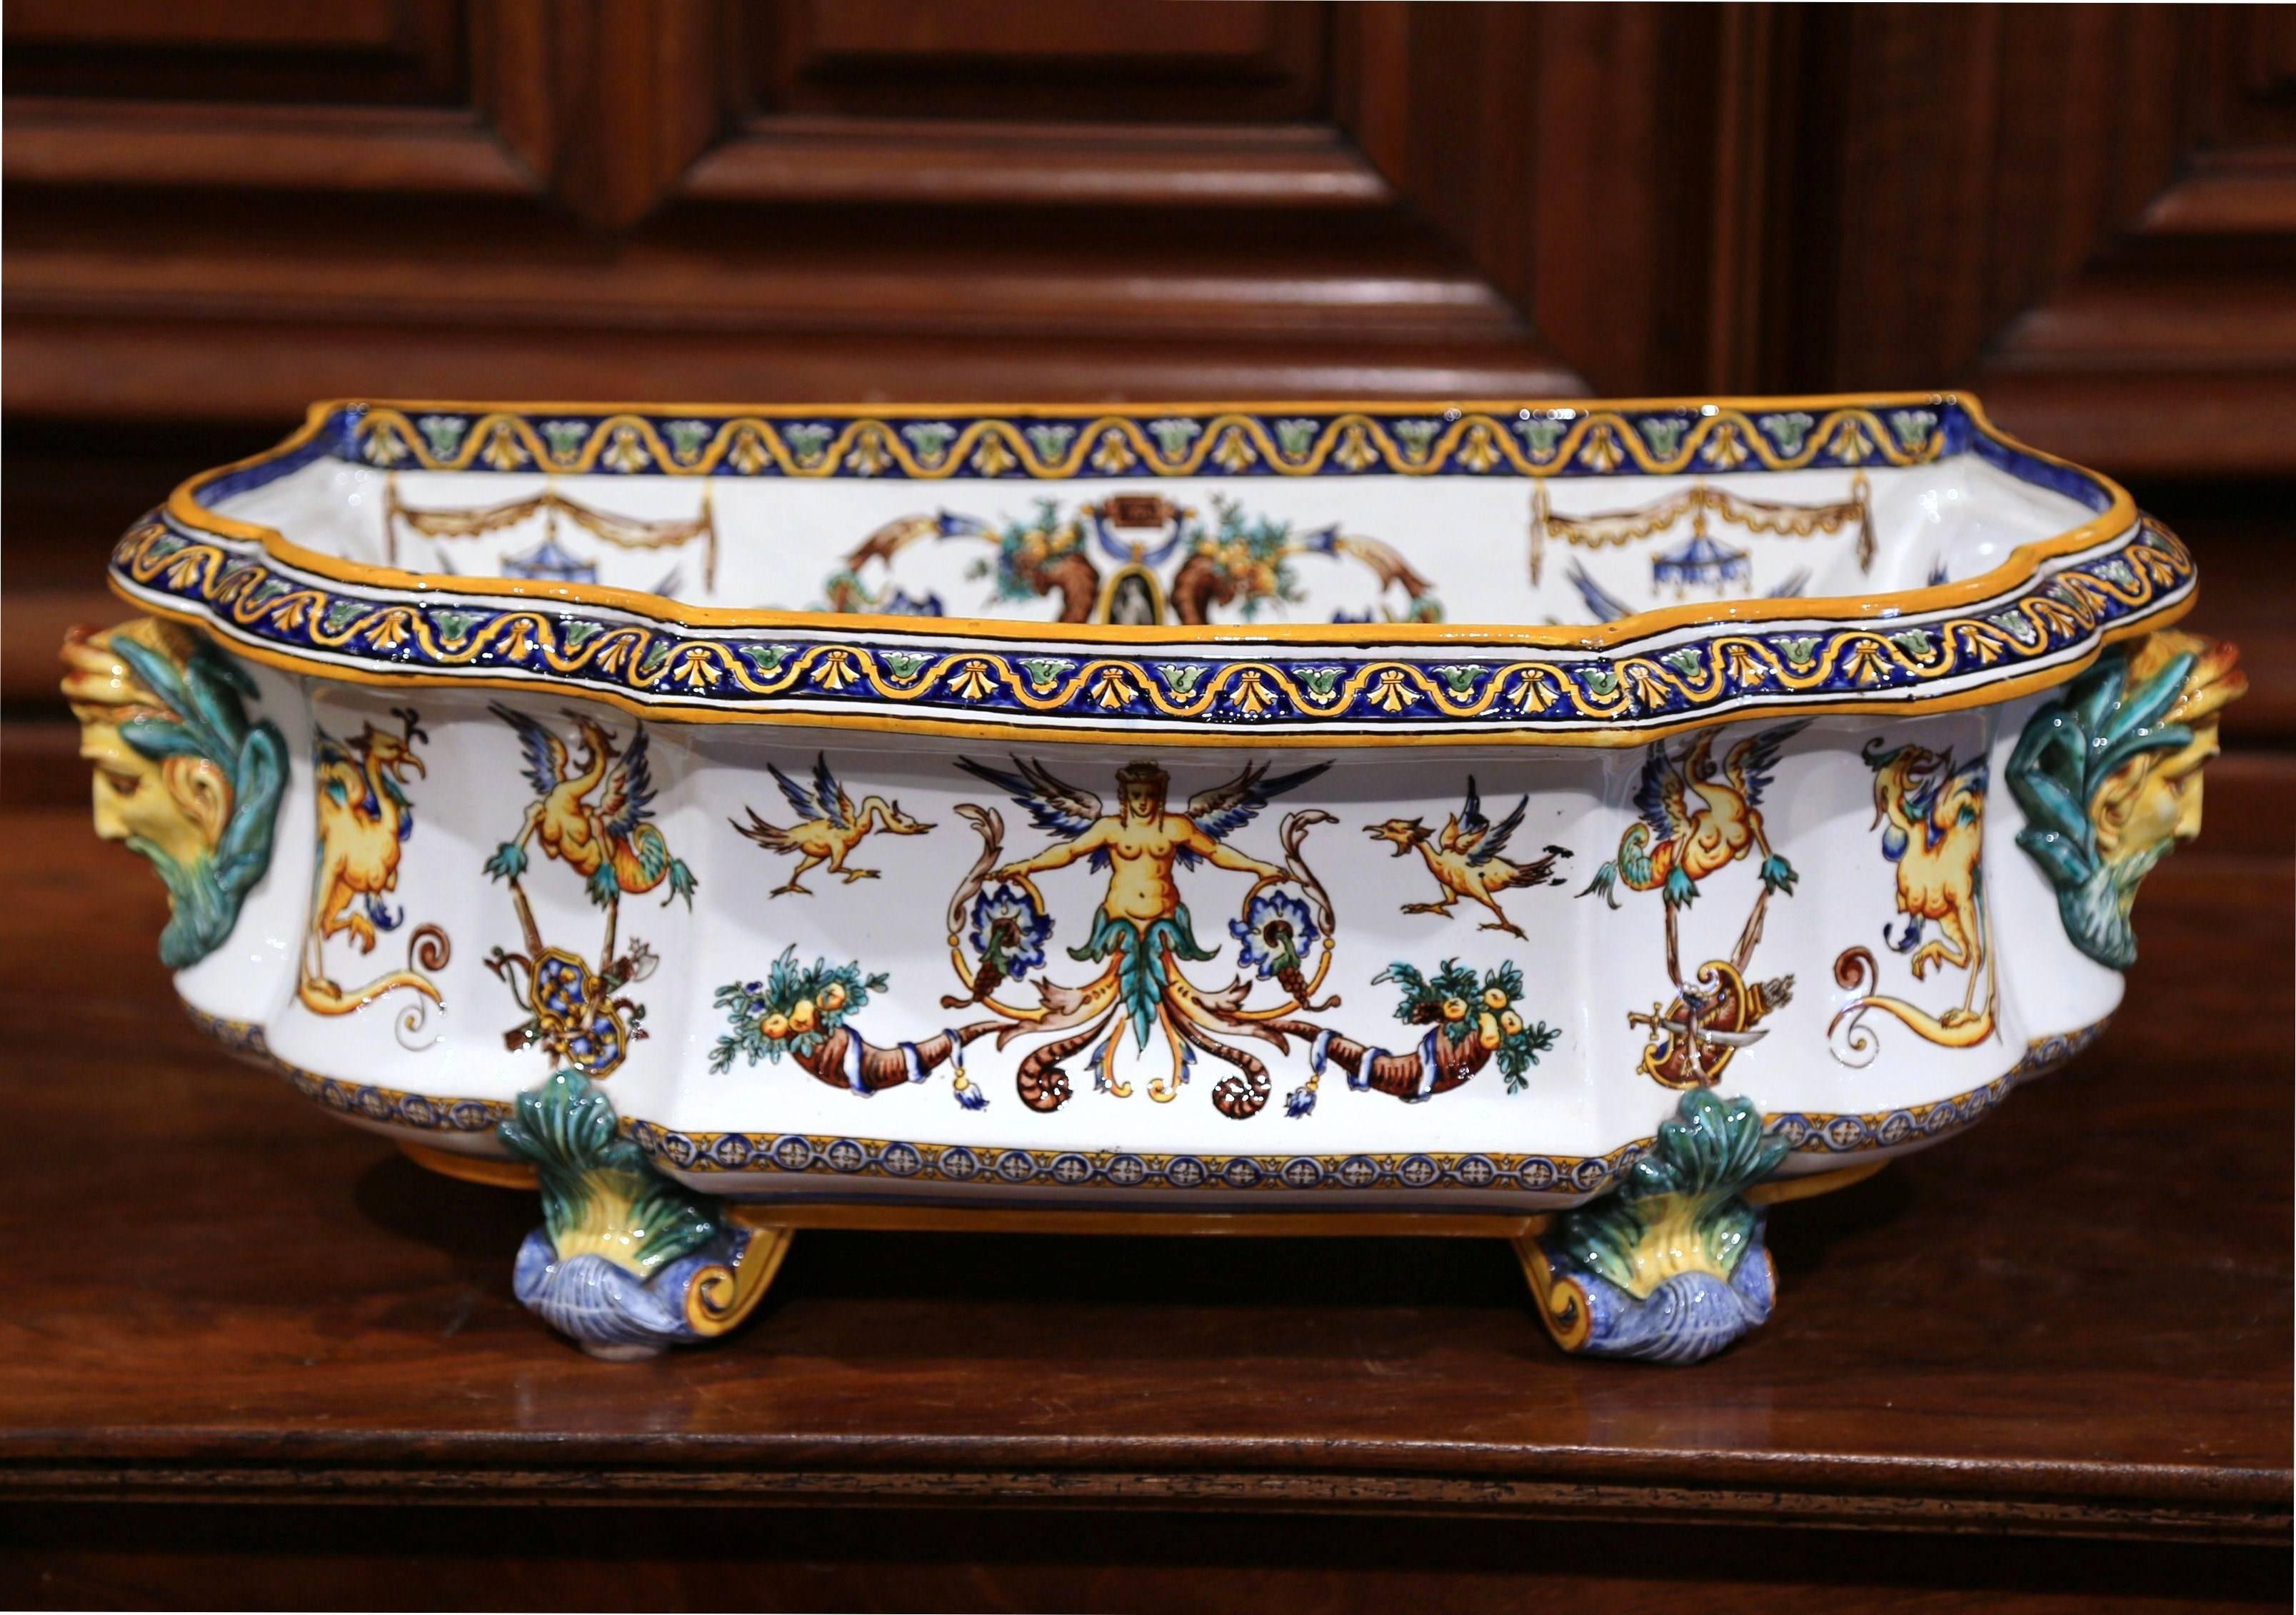 This long colorful antique planter was created in the “Faïencerie de Gien”, France, circa 1890. The large demilune shape ceramic jardinière sits on four curved feet. The planter features Greek face handles and is decorated with hand painted